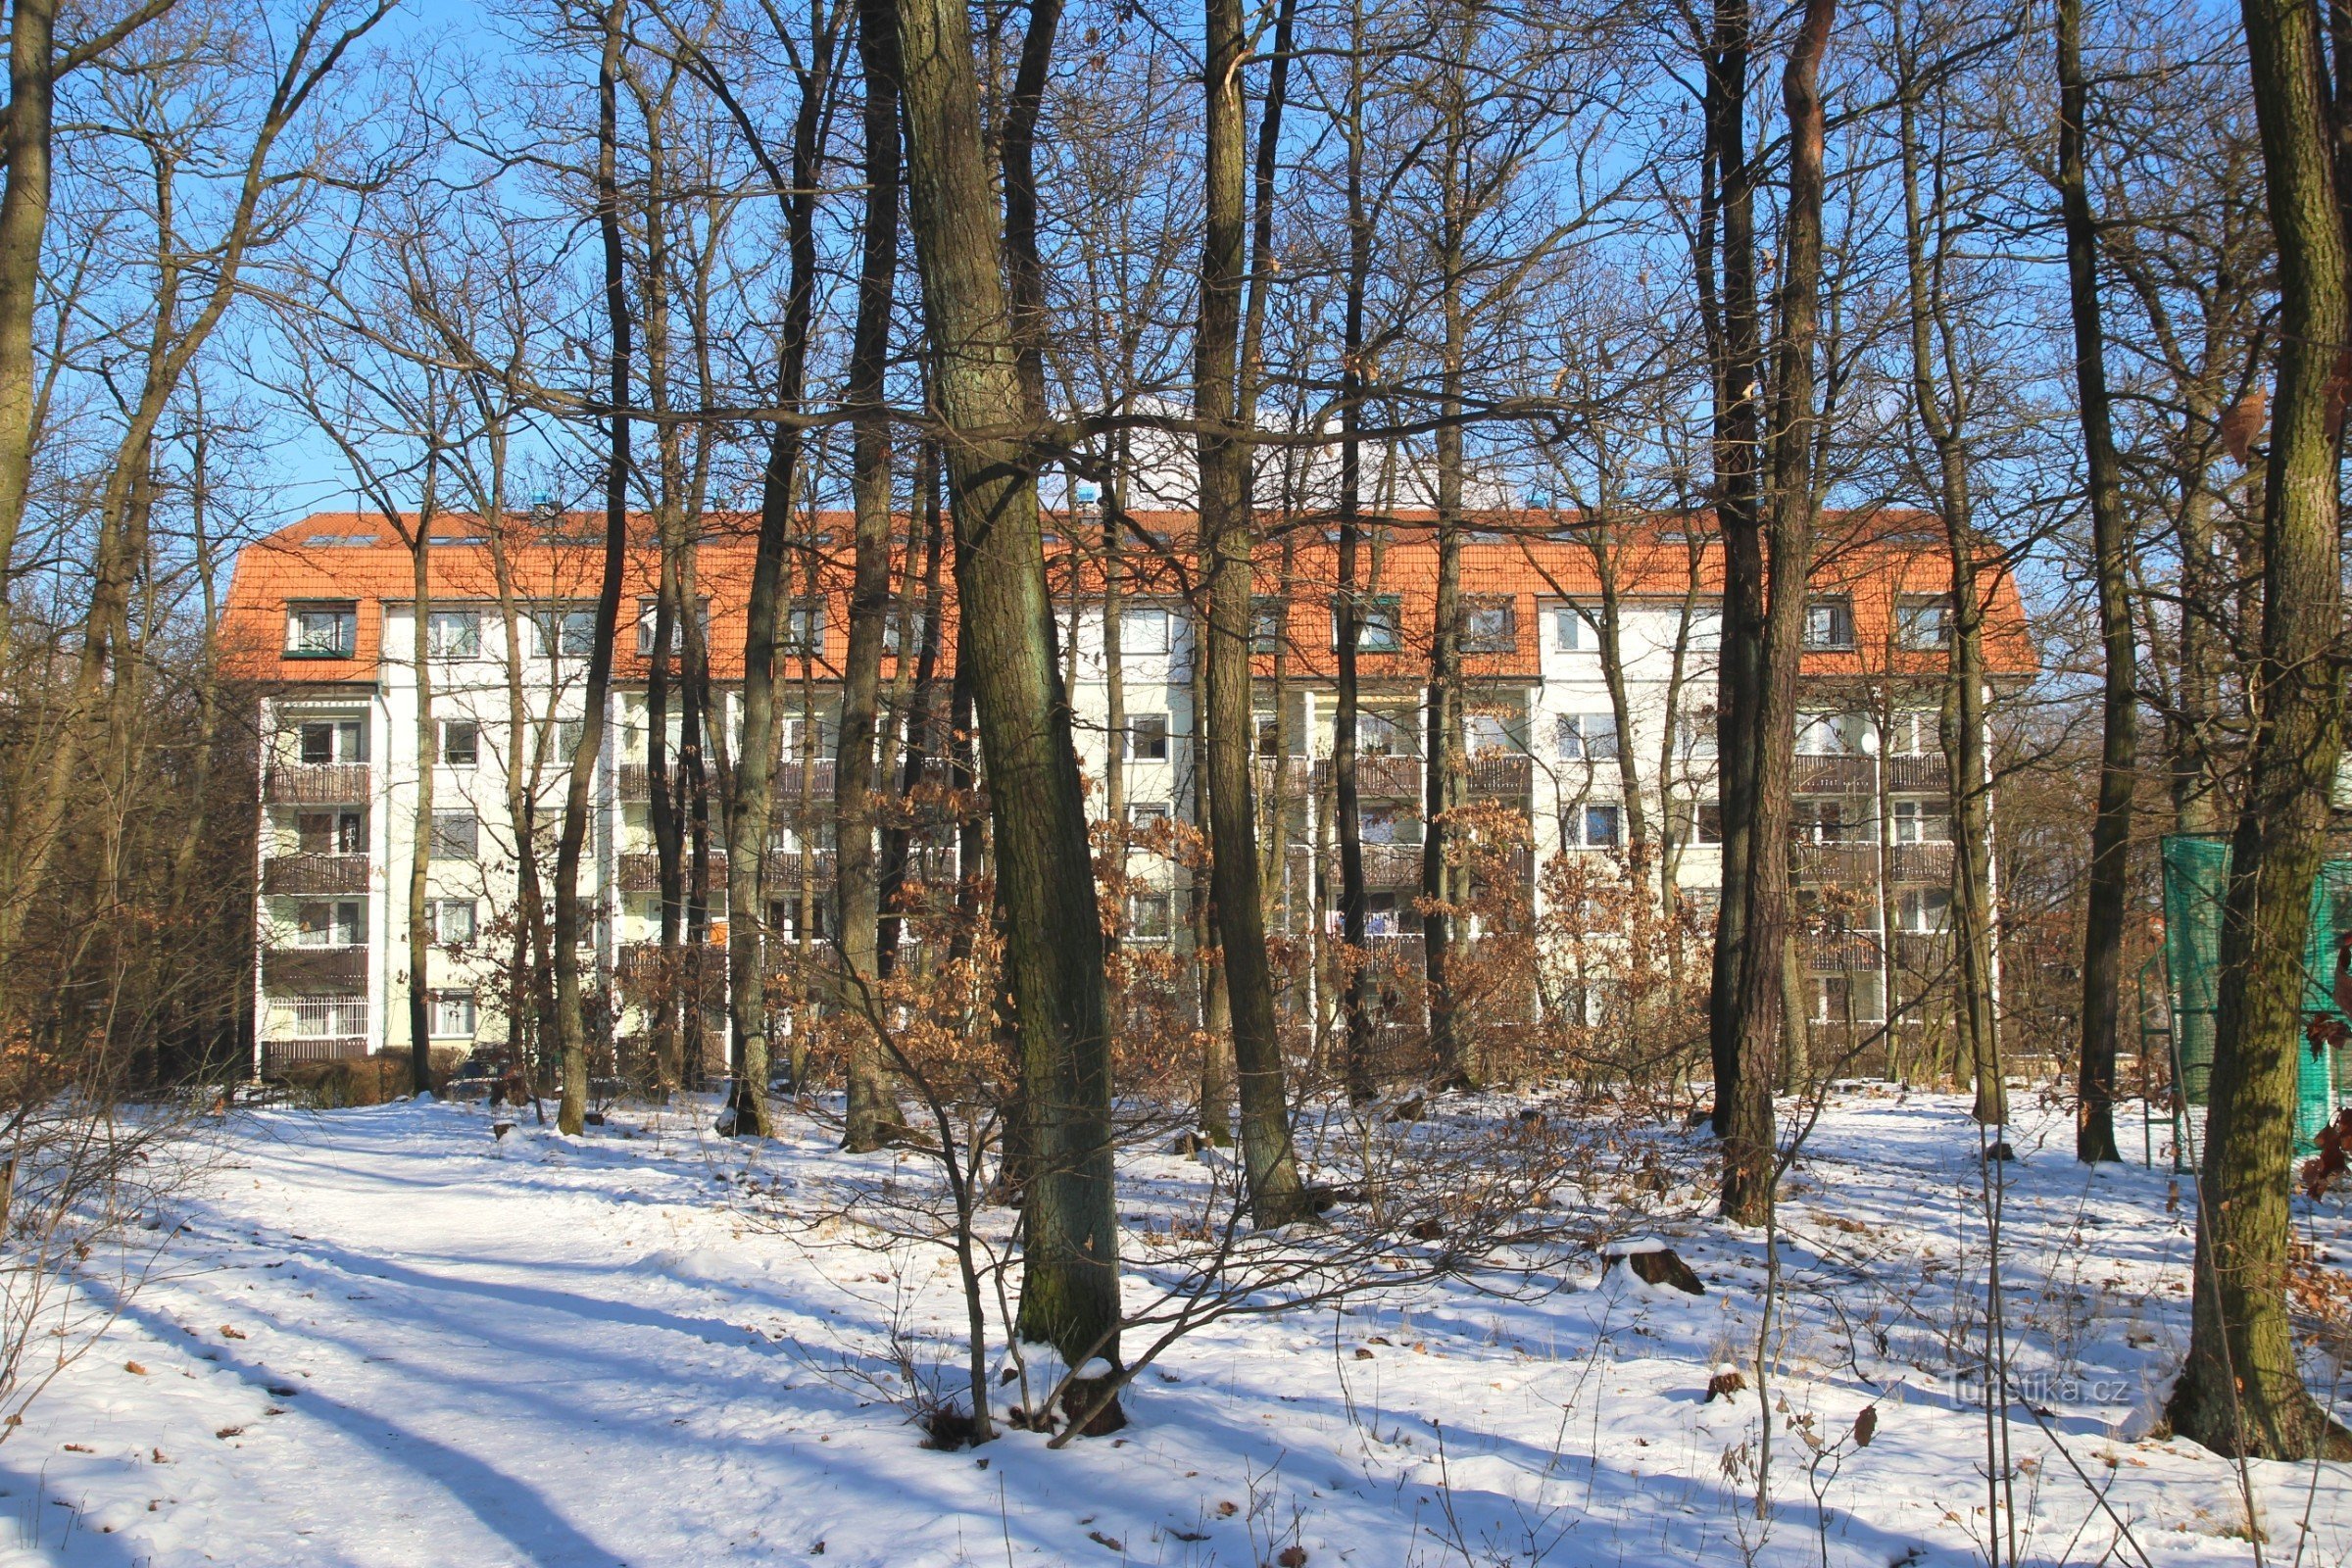 A panel house in the Kohoutovice housing estate on Bellová street